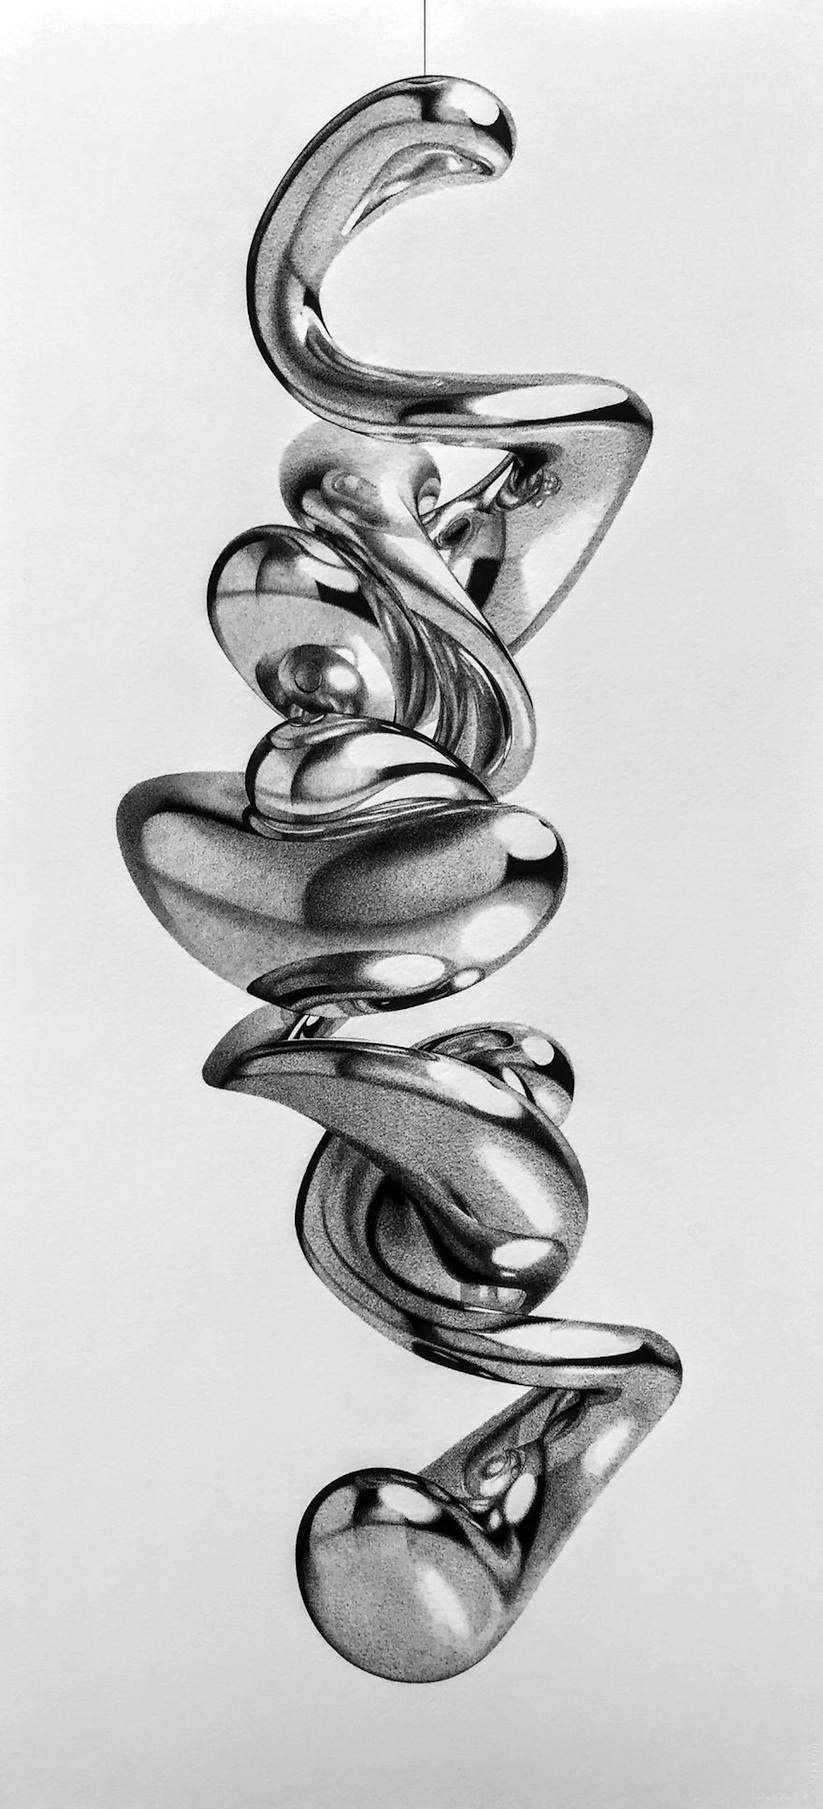 Hyperrealistic_Black_Ink_Drawings_by_Alessandro_Paglia_2016_08